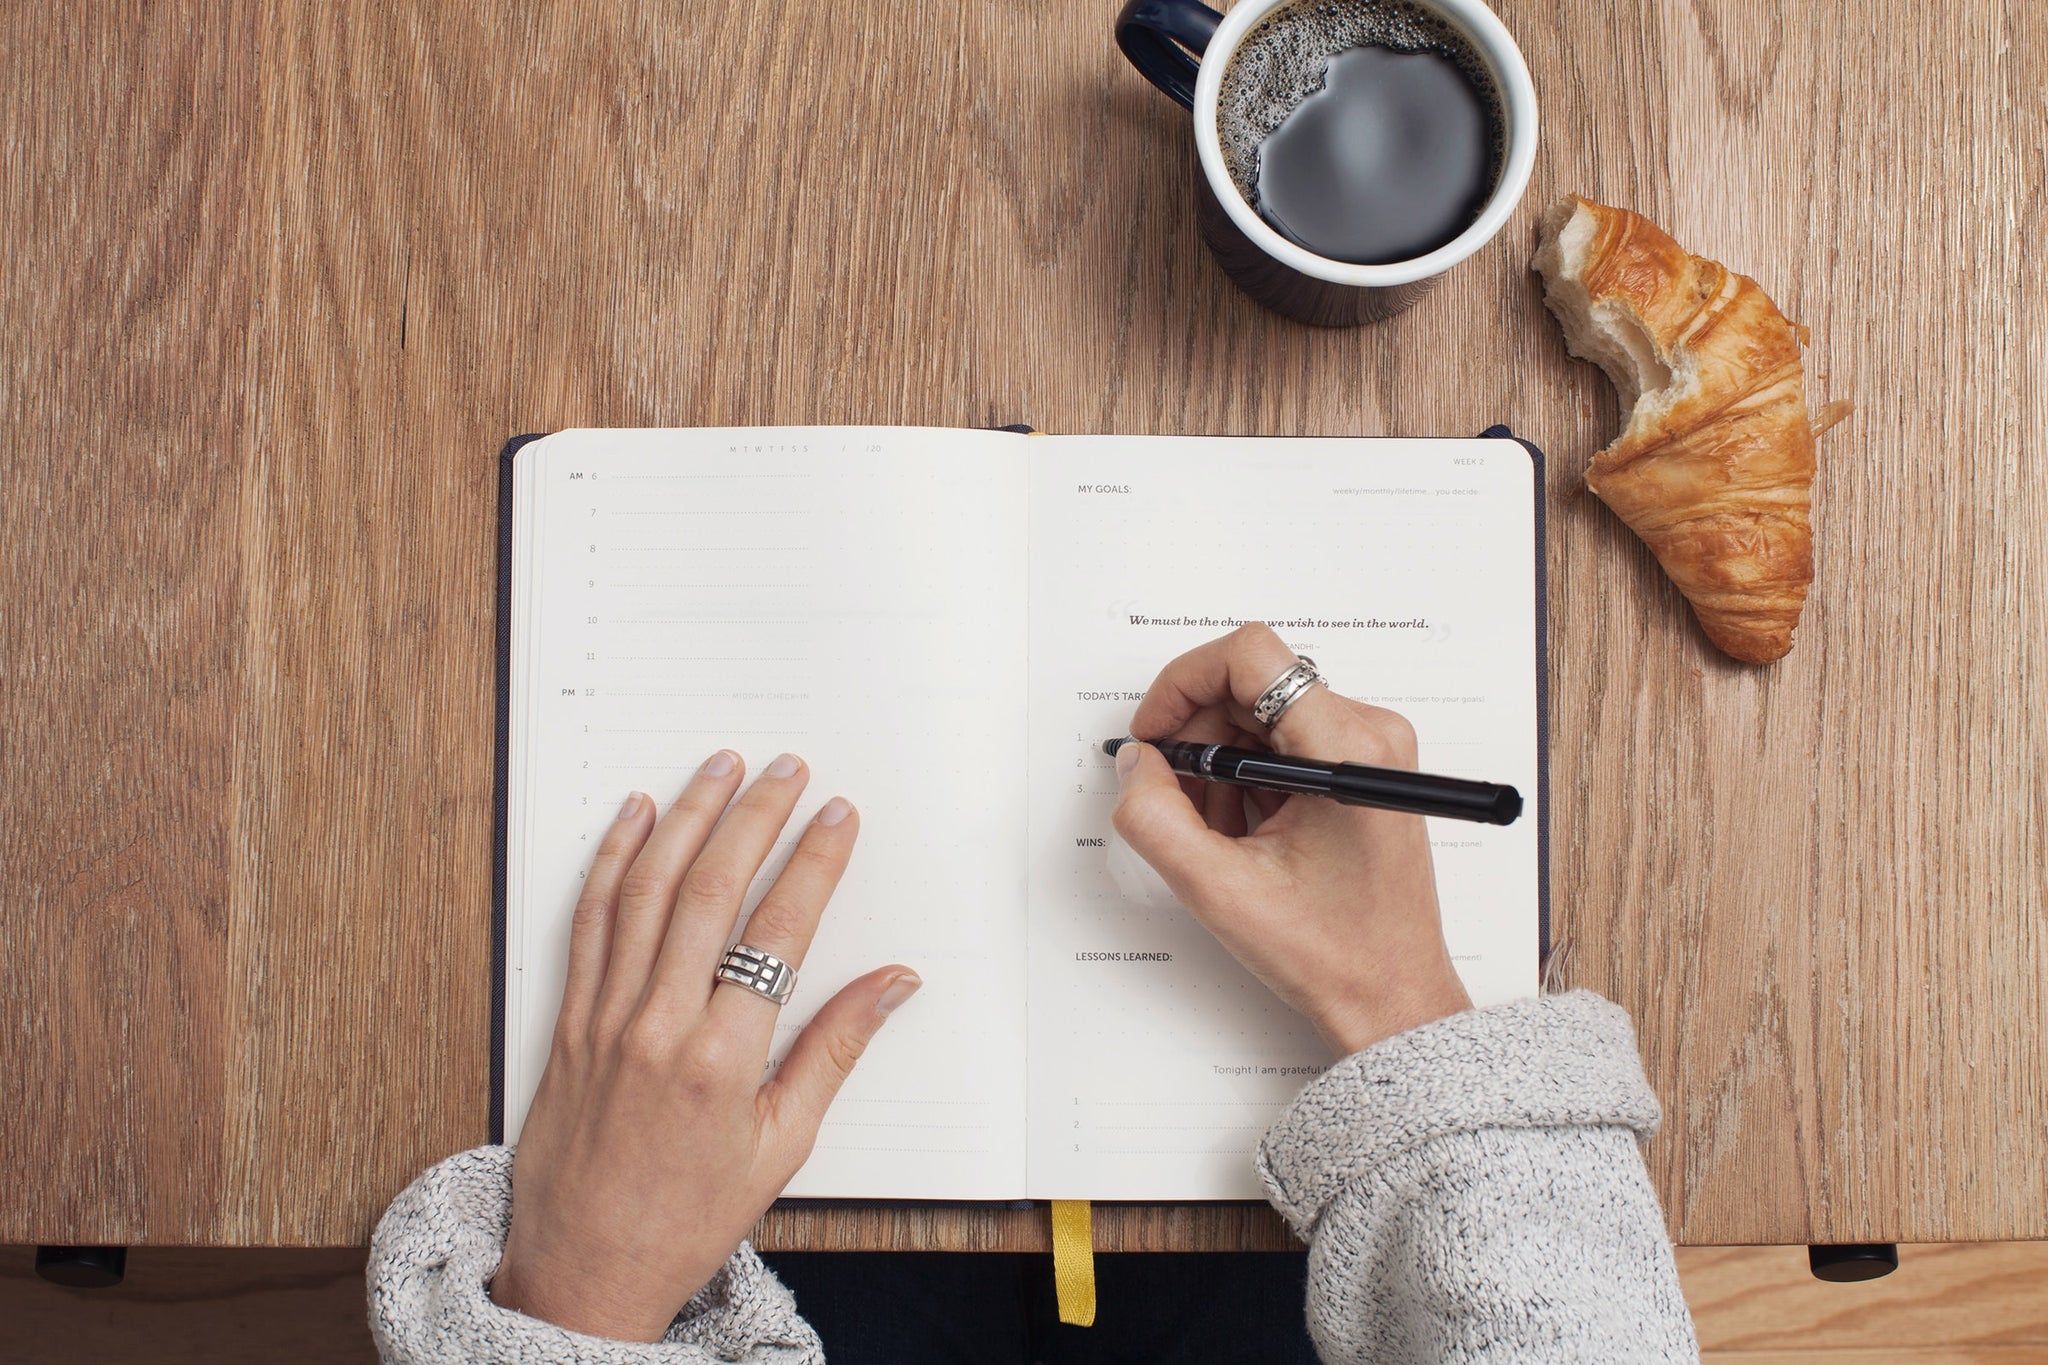 Woman writing in a diary/planner on a wooden table with a cup of coffee and a croissant next to her hands